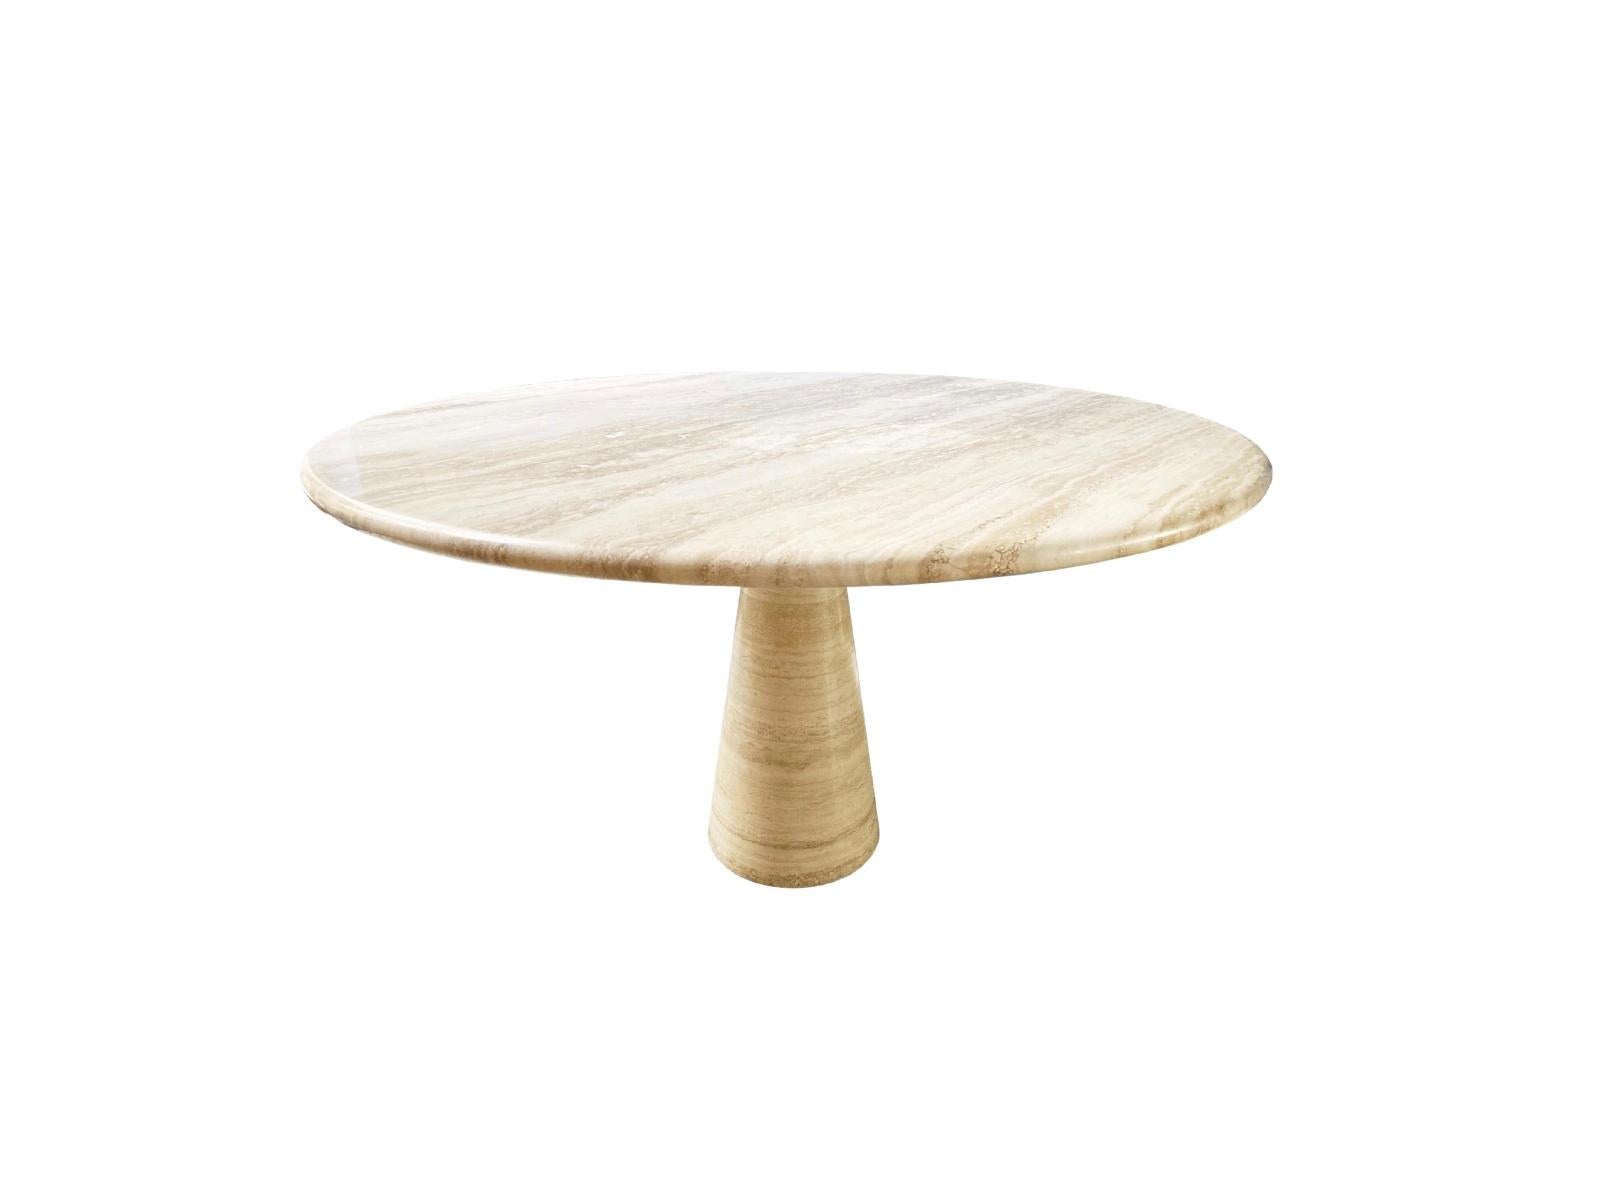 A round Italian travertine pedestal dining table, Italy, circa 1980s. 
Modern and minimalist design. 

The marvel of this Italian table design is the top balances perfectly and securely by it's own weight.
Beautiful grain pattern with a filled and